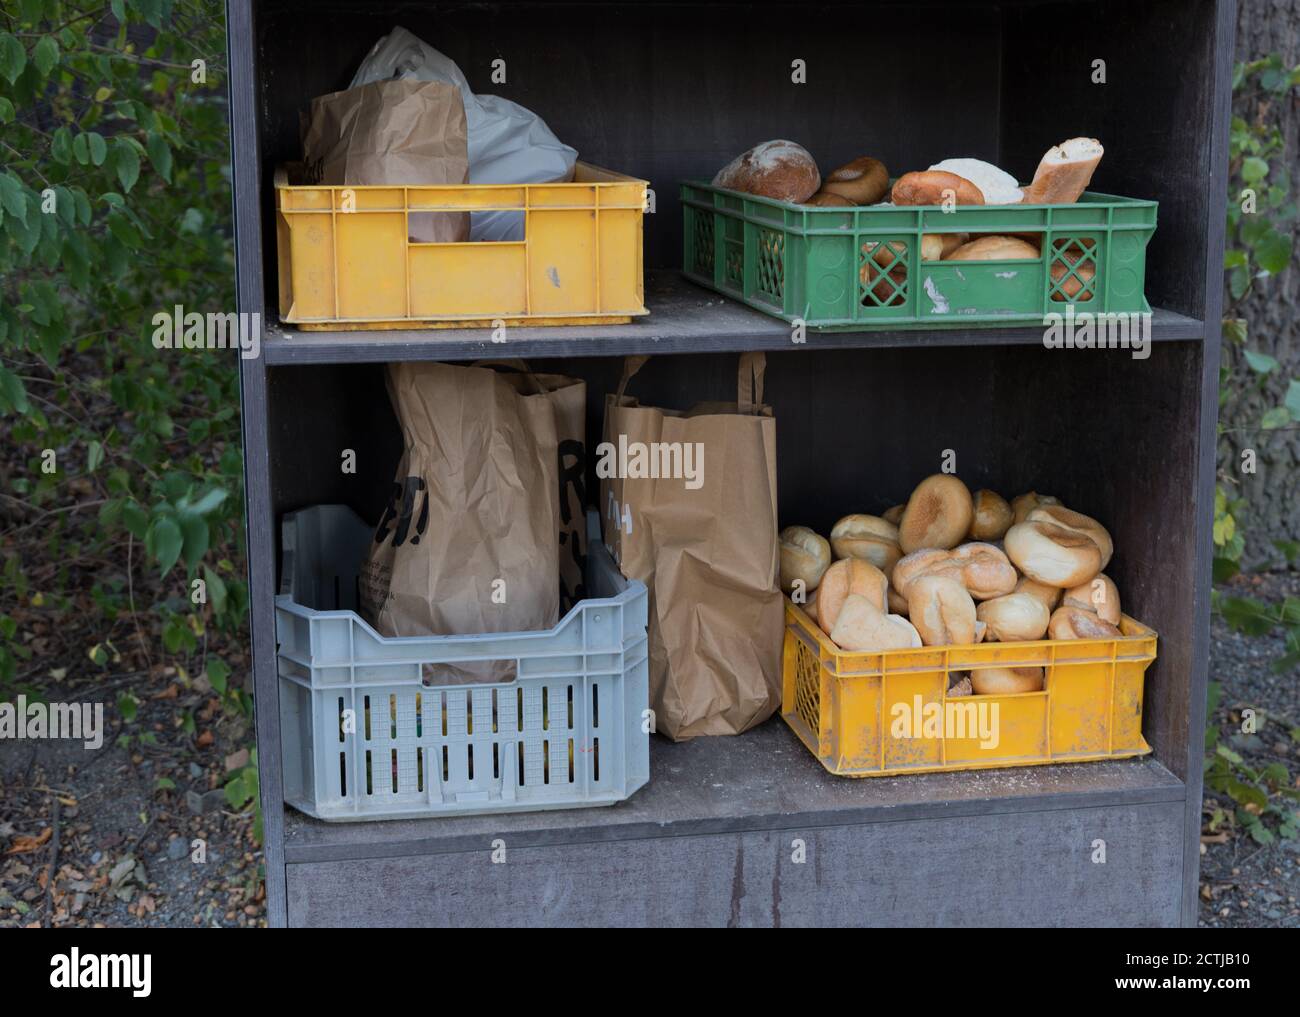 boxes and paper bags with old bread as a donation for animals Stock Photo